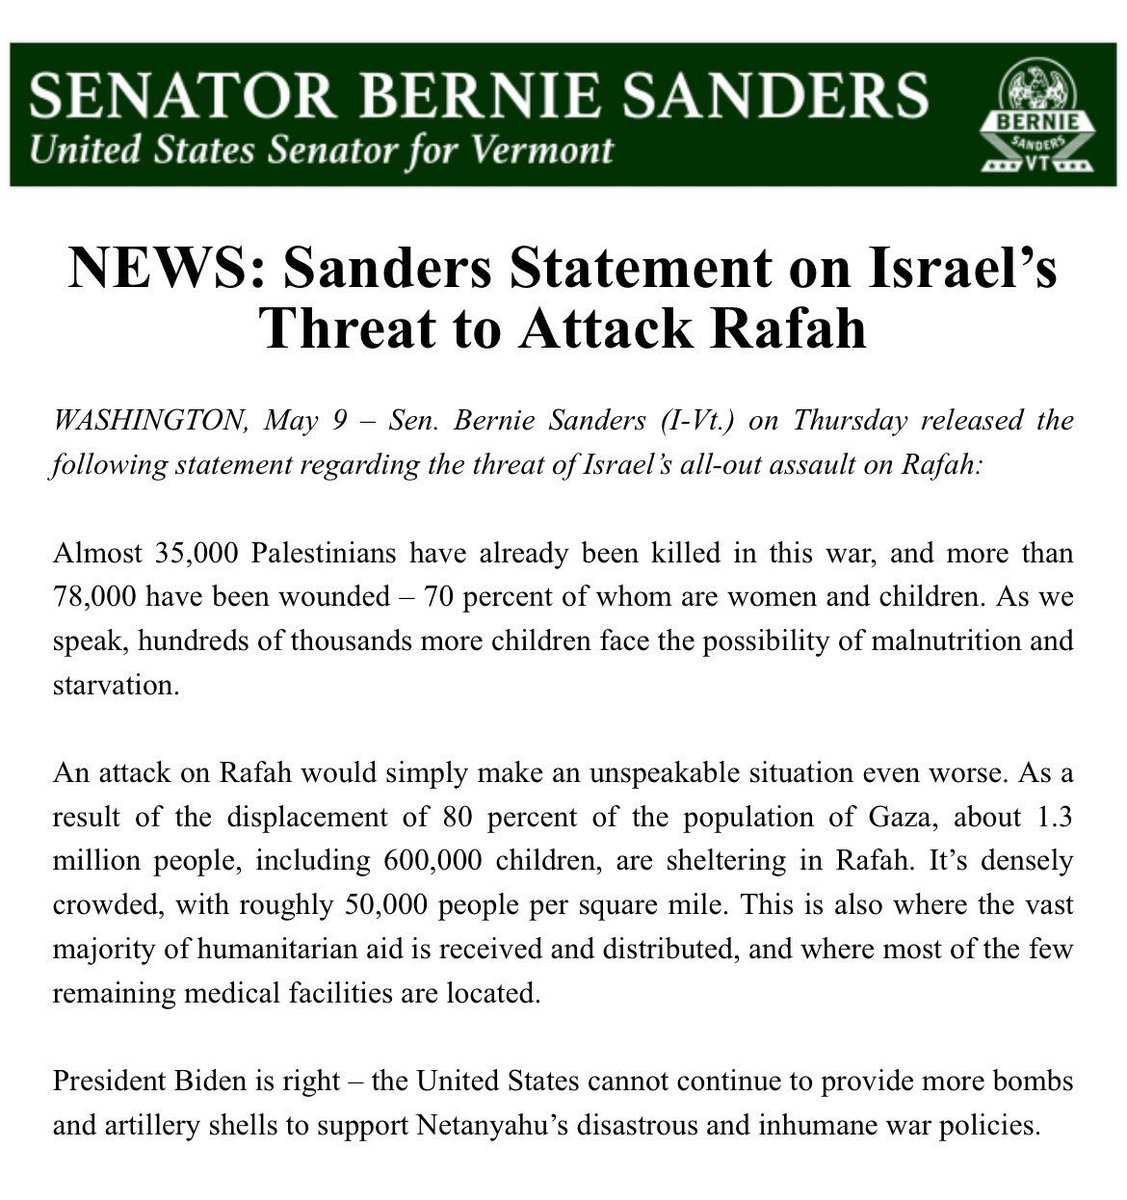 An attack on Rafah would simply make an unspeakable situation even worse. President Biden is right – the United States cannot continue to provide more bombs and artillery shells to support Netanyahu’s disastrous and inhumane war policies.